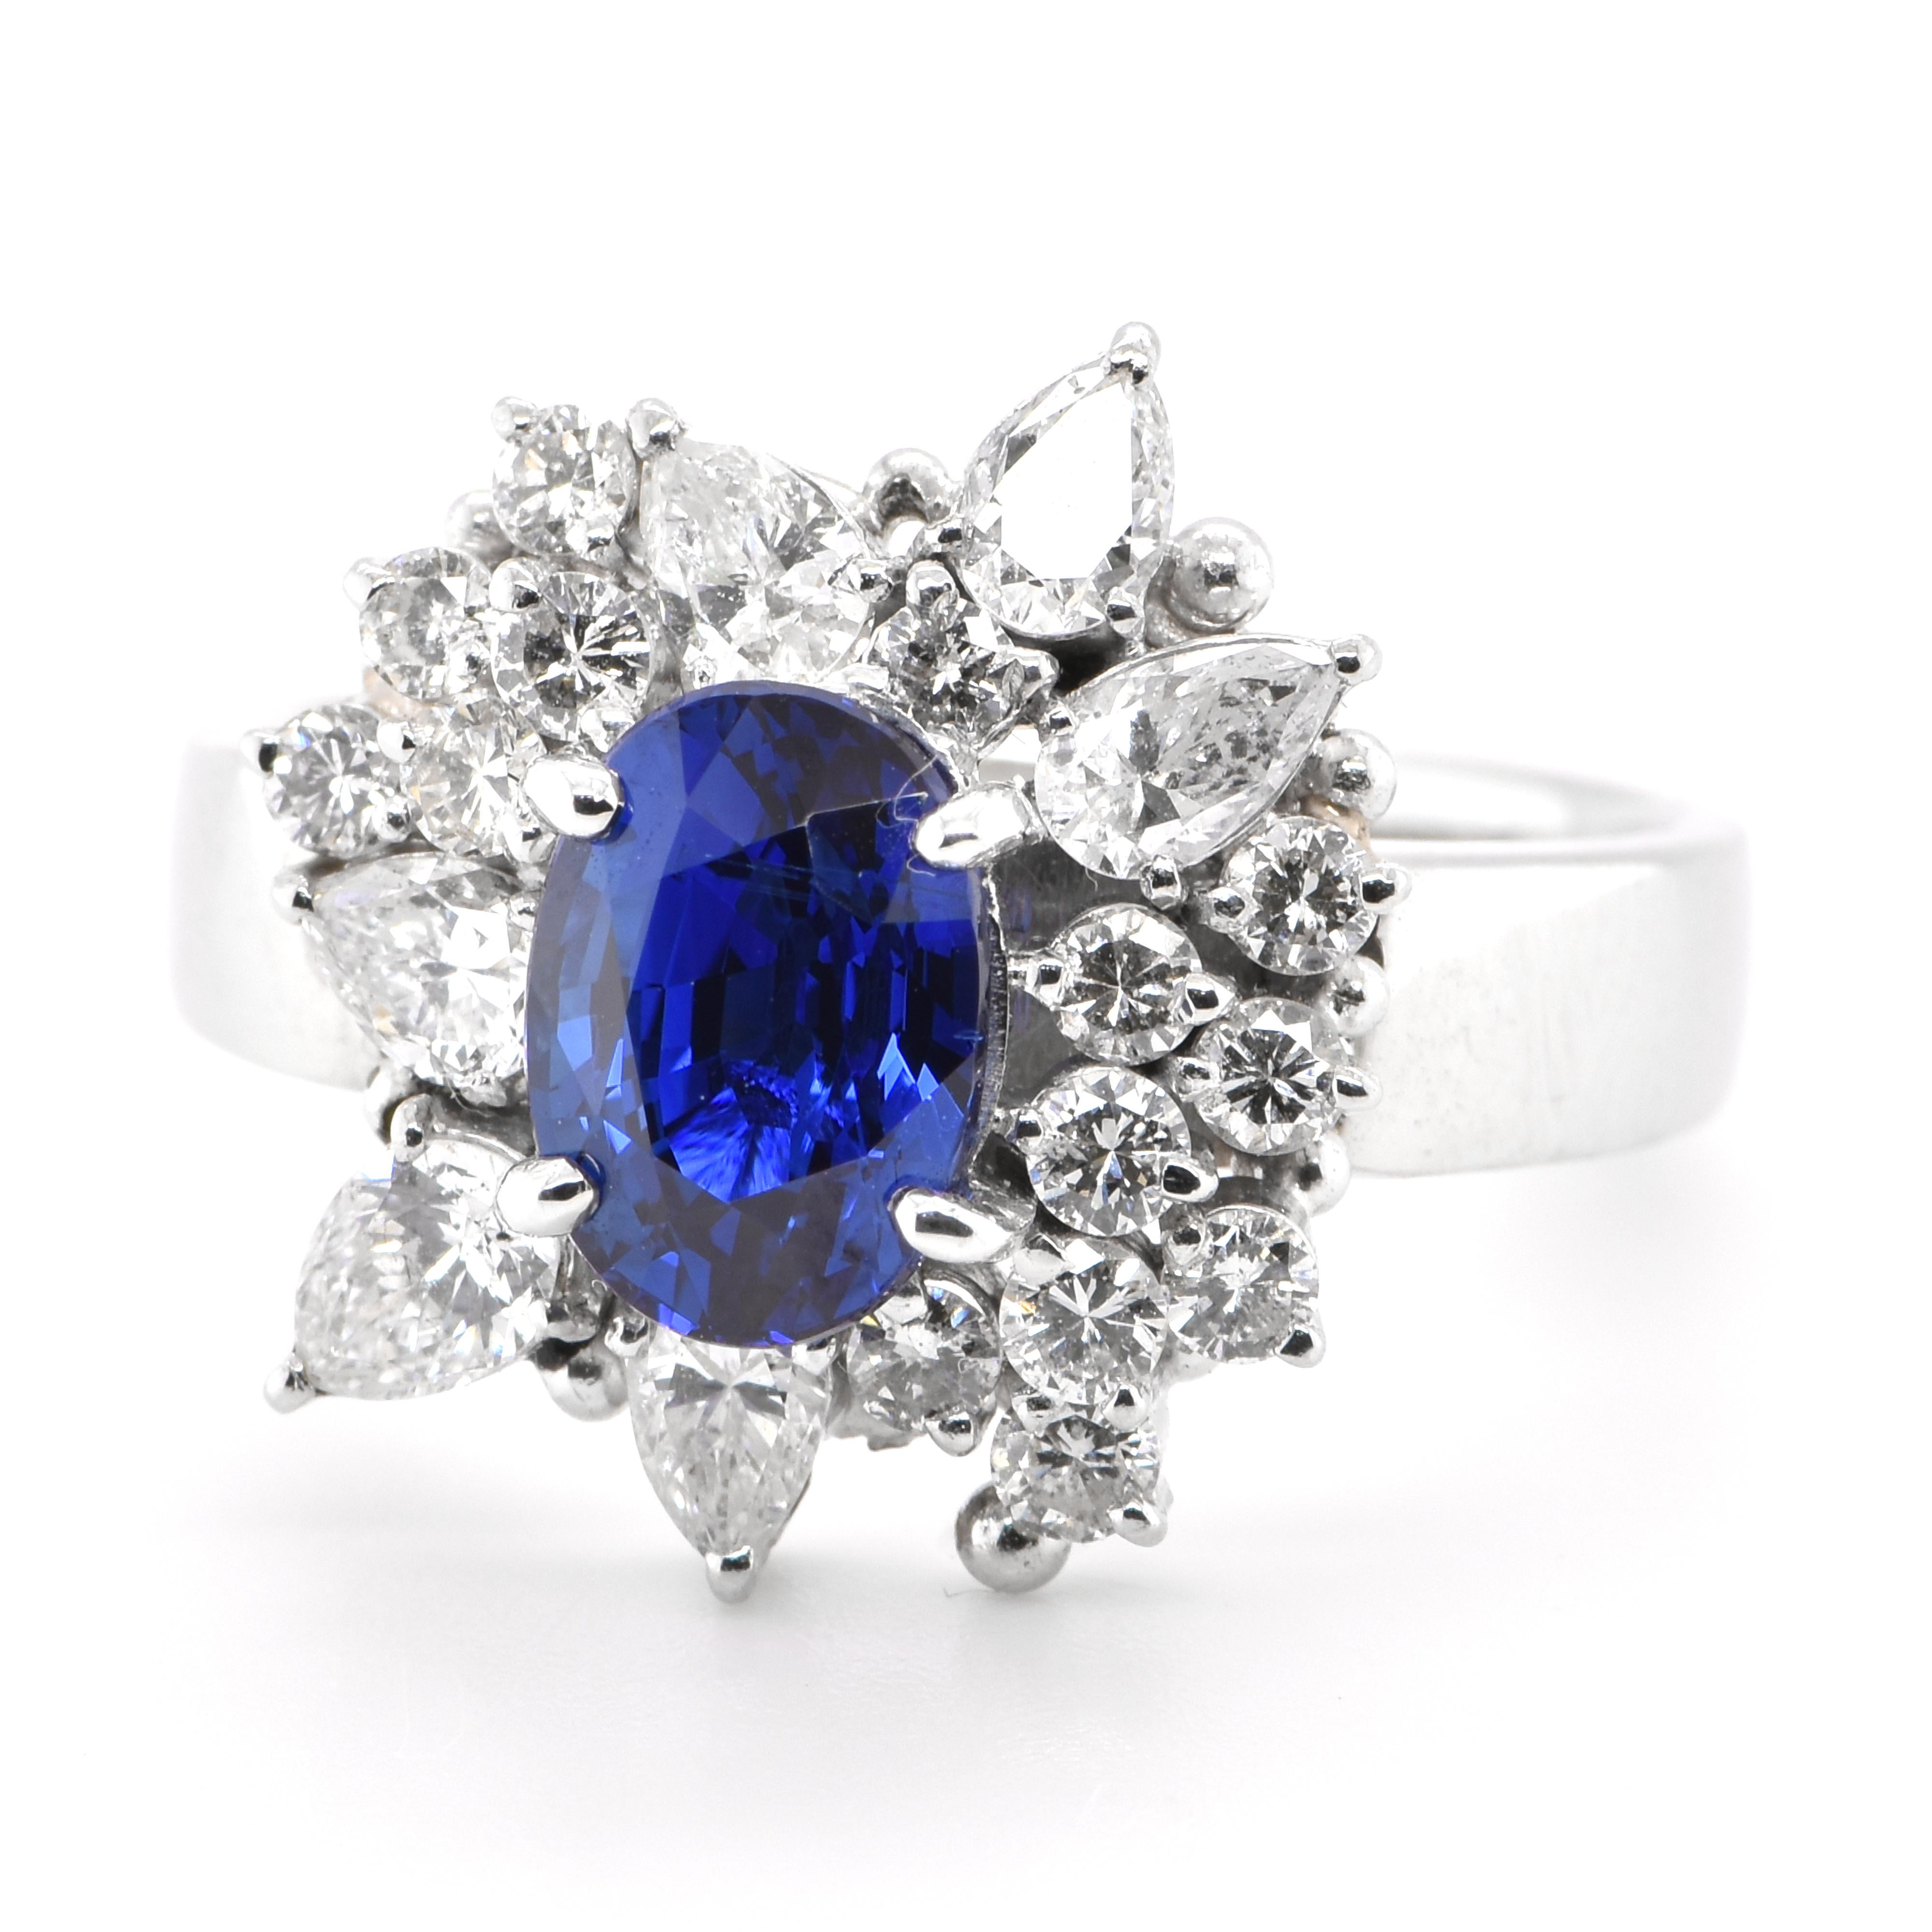 A beautiful Cocktail Ring featuring a GIA Certified Natural Madagascar Sapphire and 1.38 Carats Diamond Accents set in Platinum. Sapphires have extraordinary durability - they excel in hardness as well as toughness and durability making them very